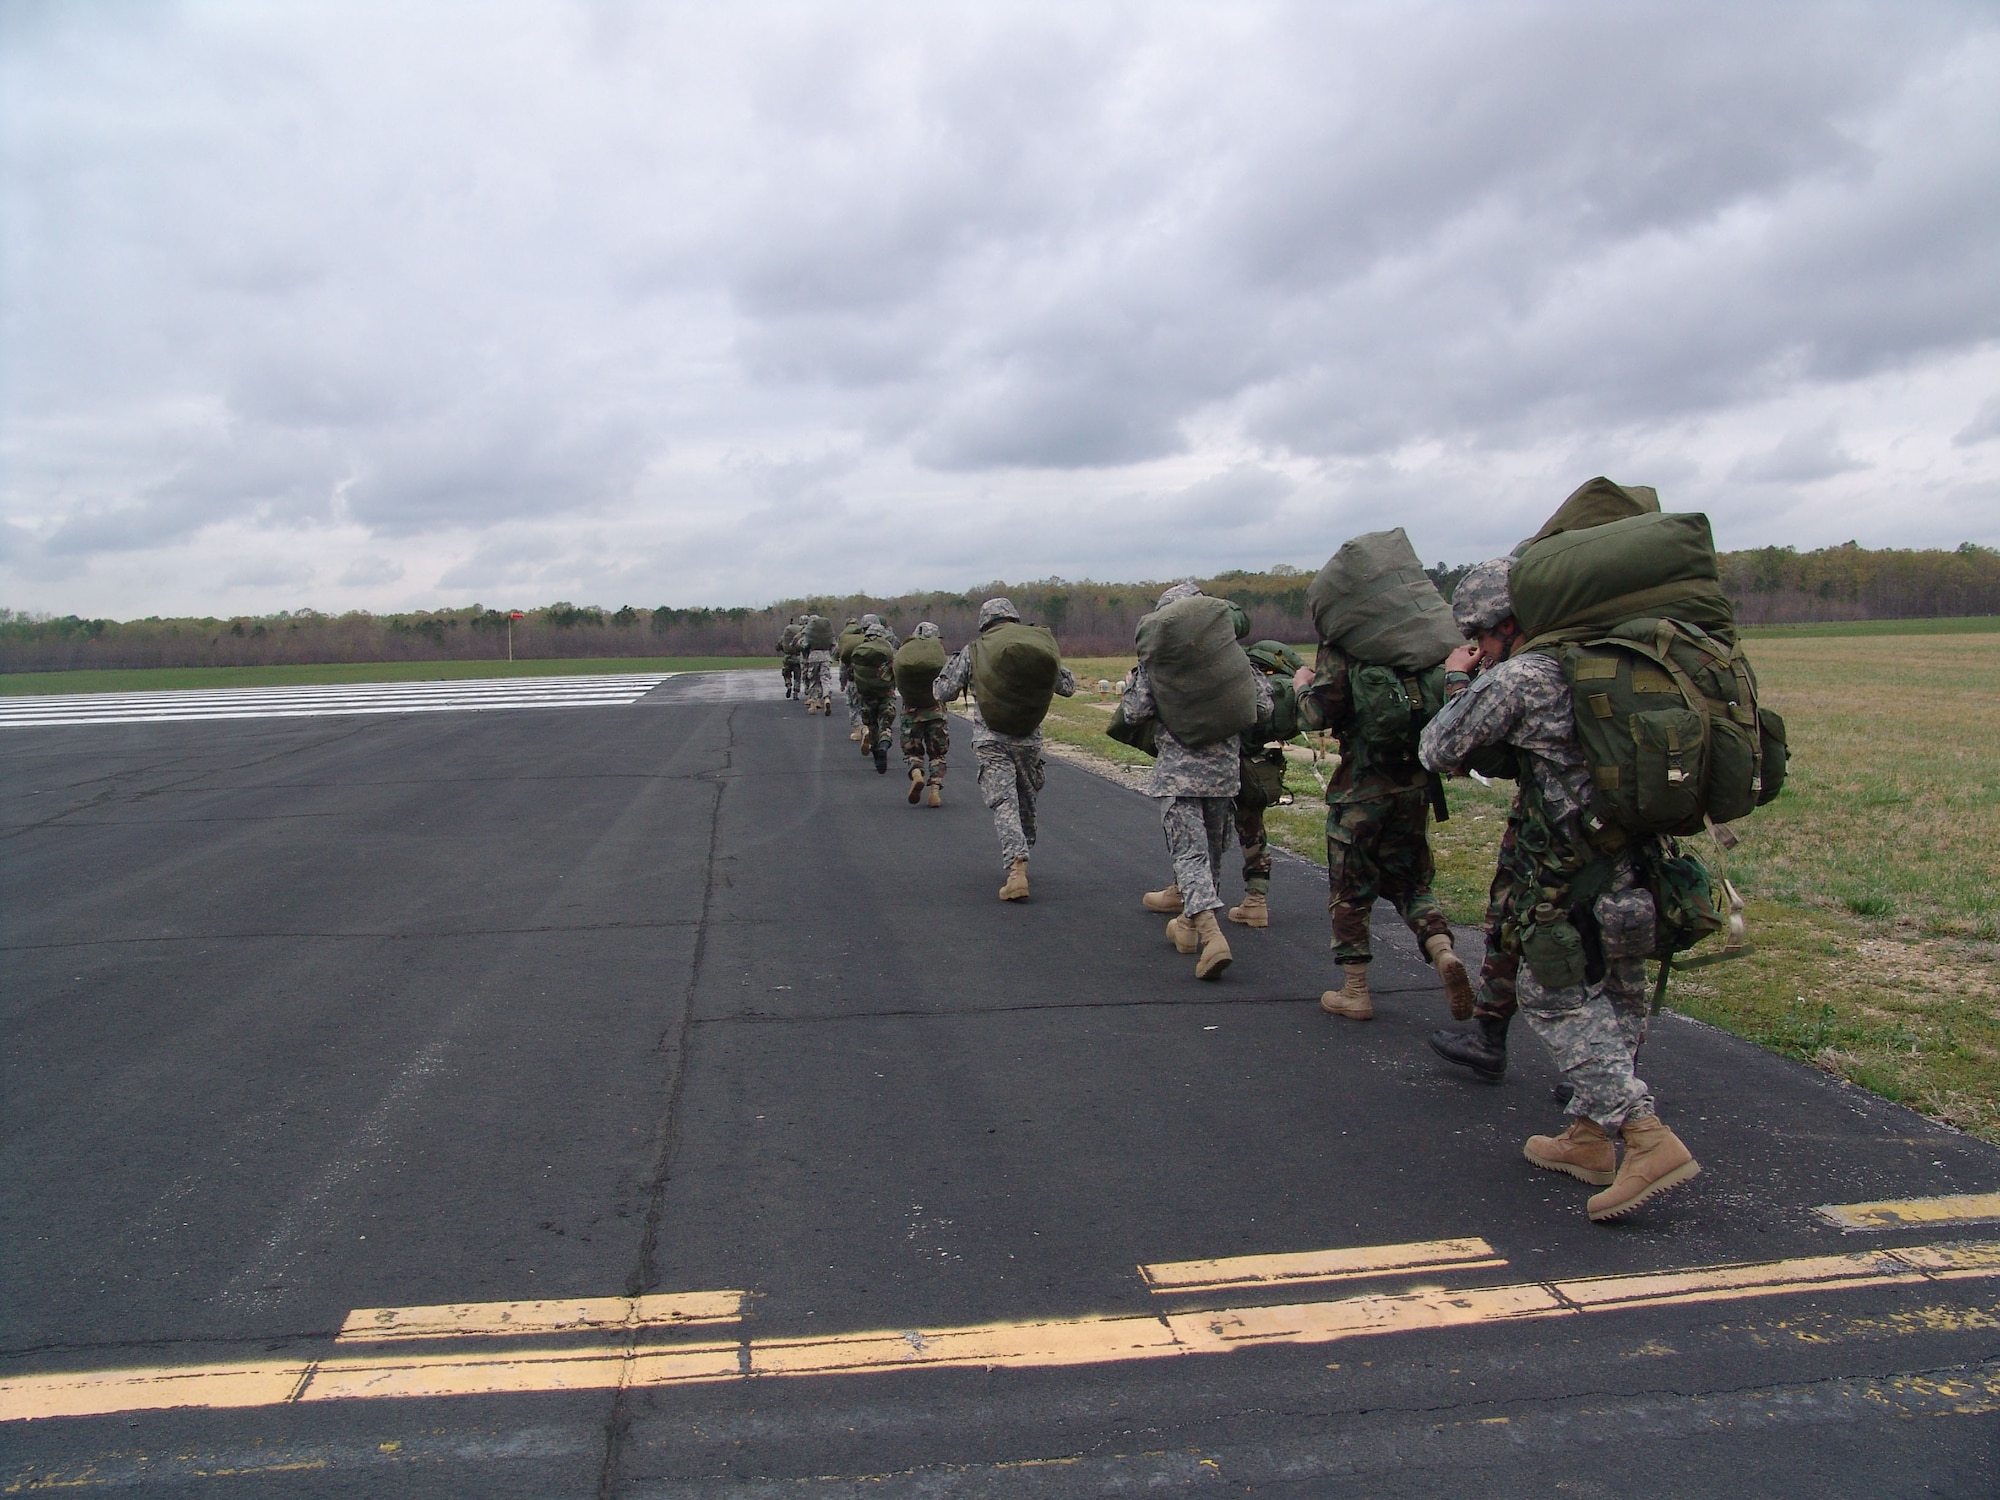 Paratroopers from the 861st Quartermaster Company in Nashville, Tenn., march back to the runway at Arnold Air Force Base's airfield after parchuting during a mock-deployment exercise on base. (Photo by Claude Morse)